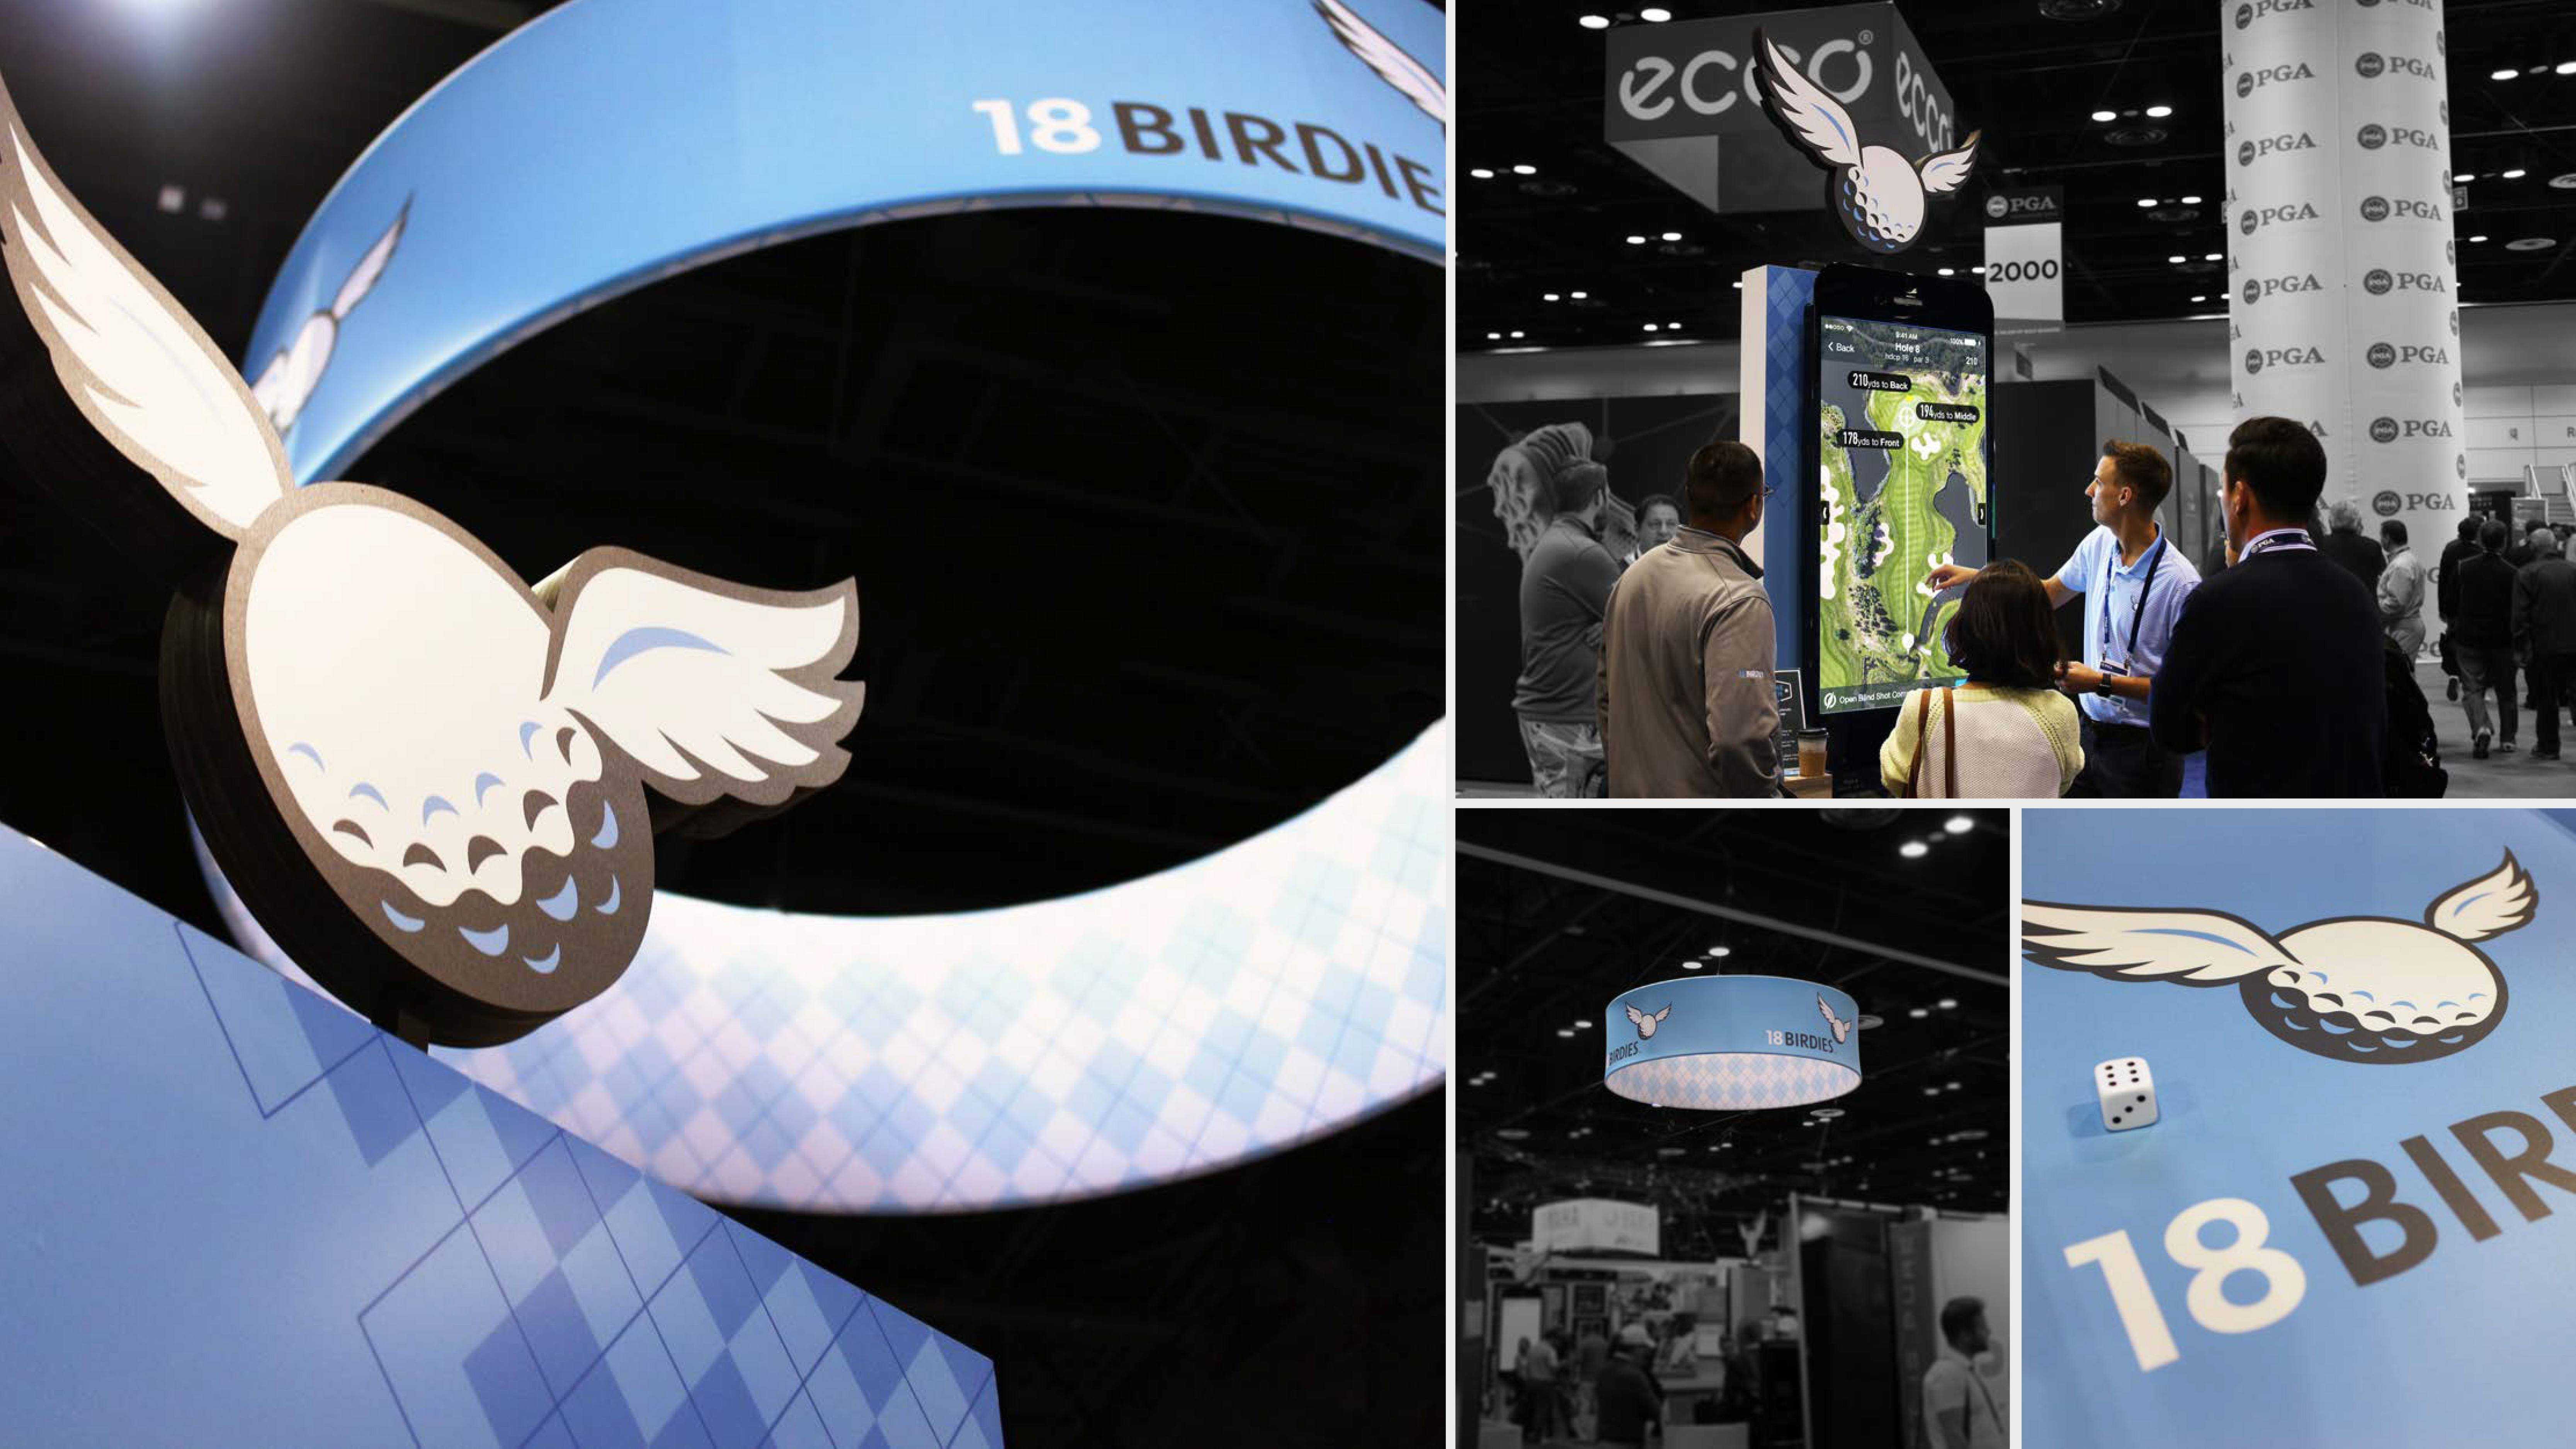 18Birdies tradeshow booth images in a grid